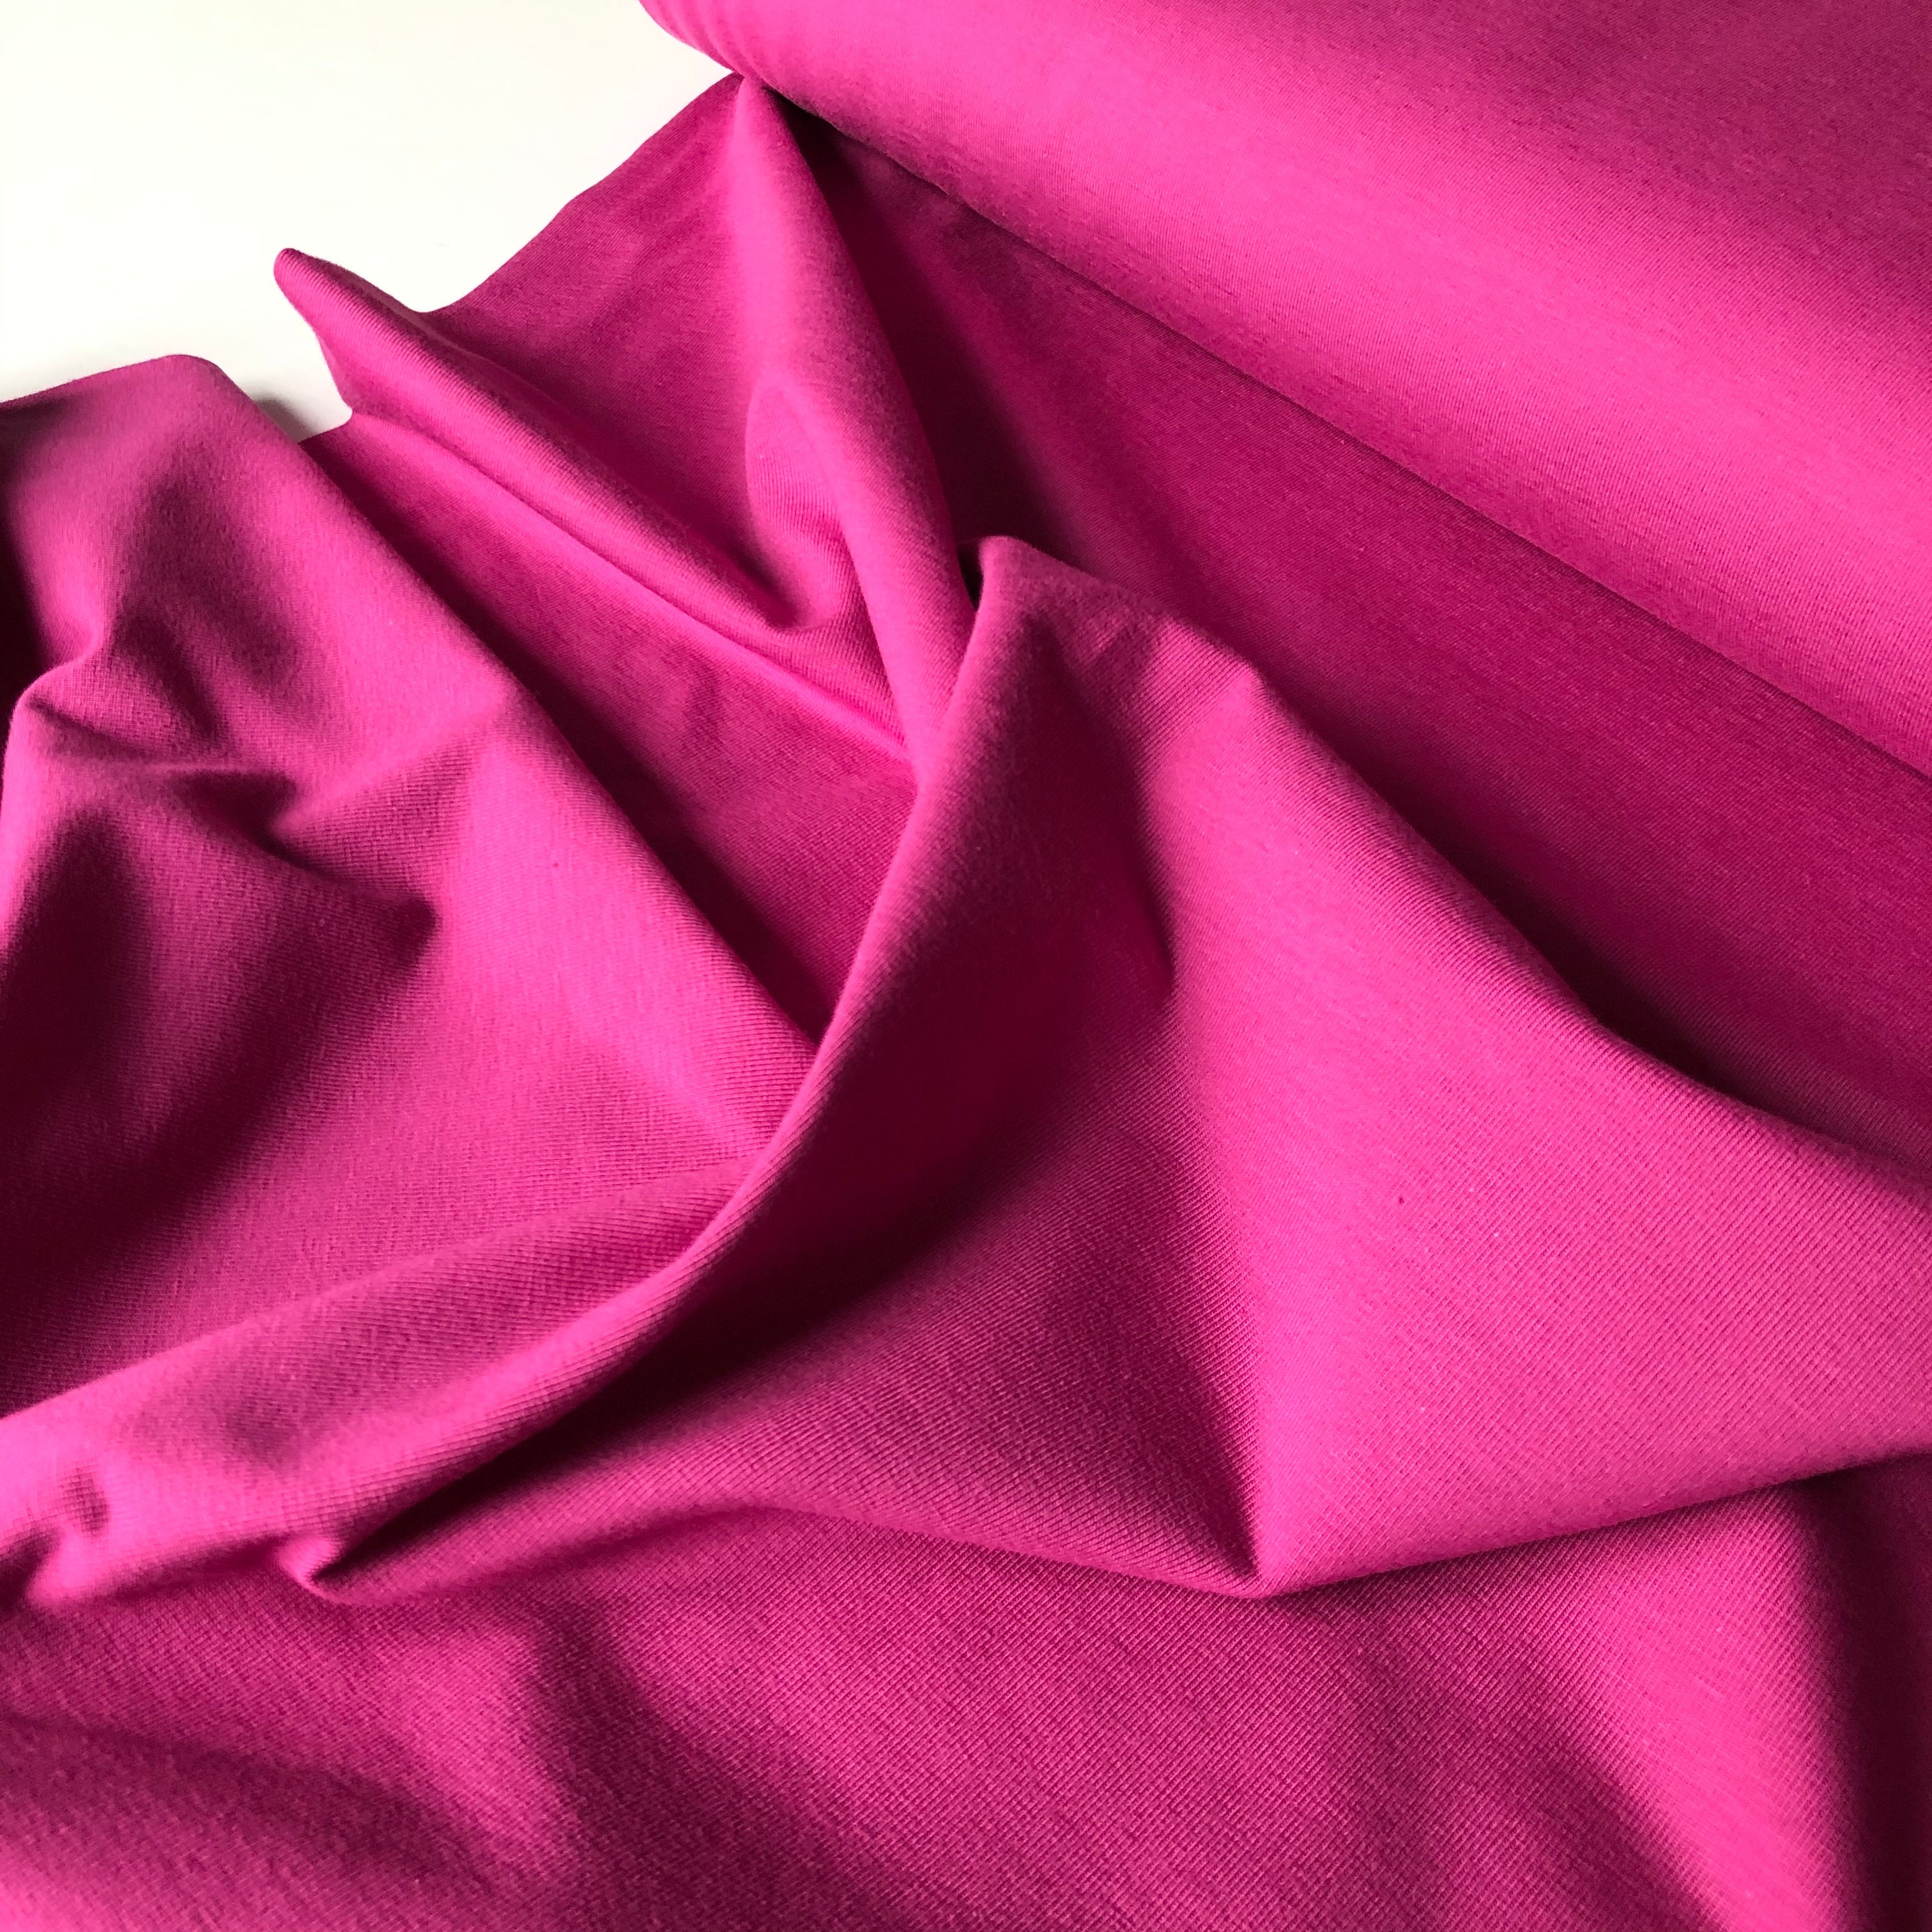 REMNANT 0.58 Metre - Essential Chic Soft Magenta Cotton Jersey Fabric